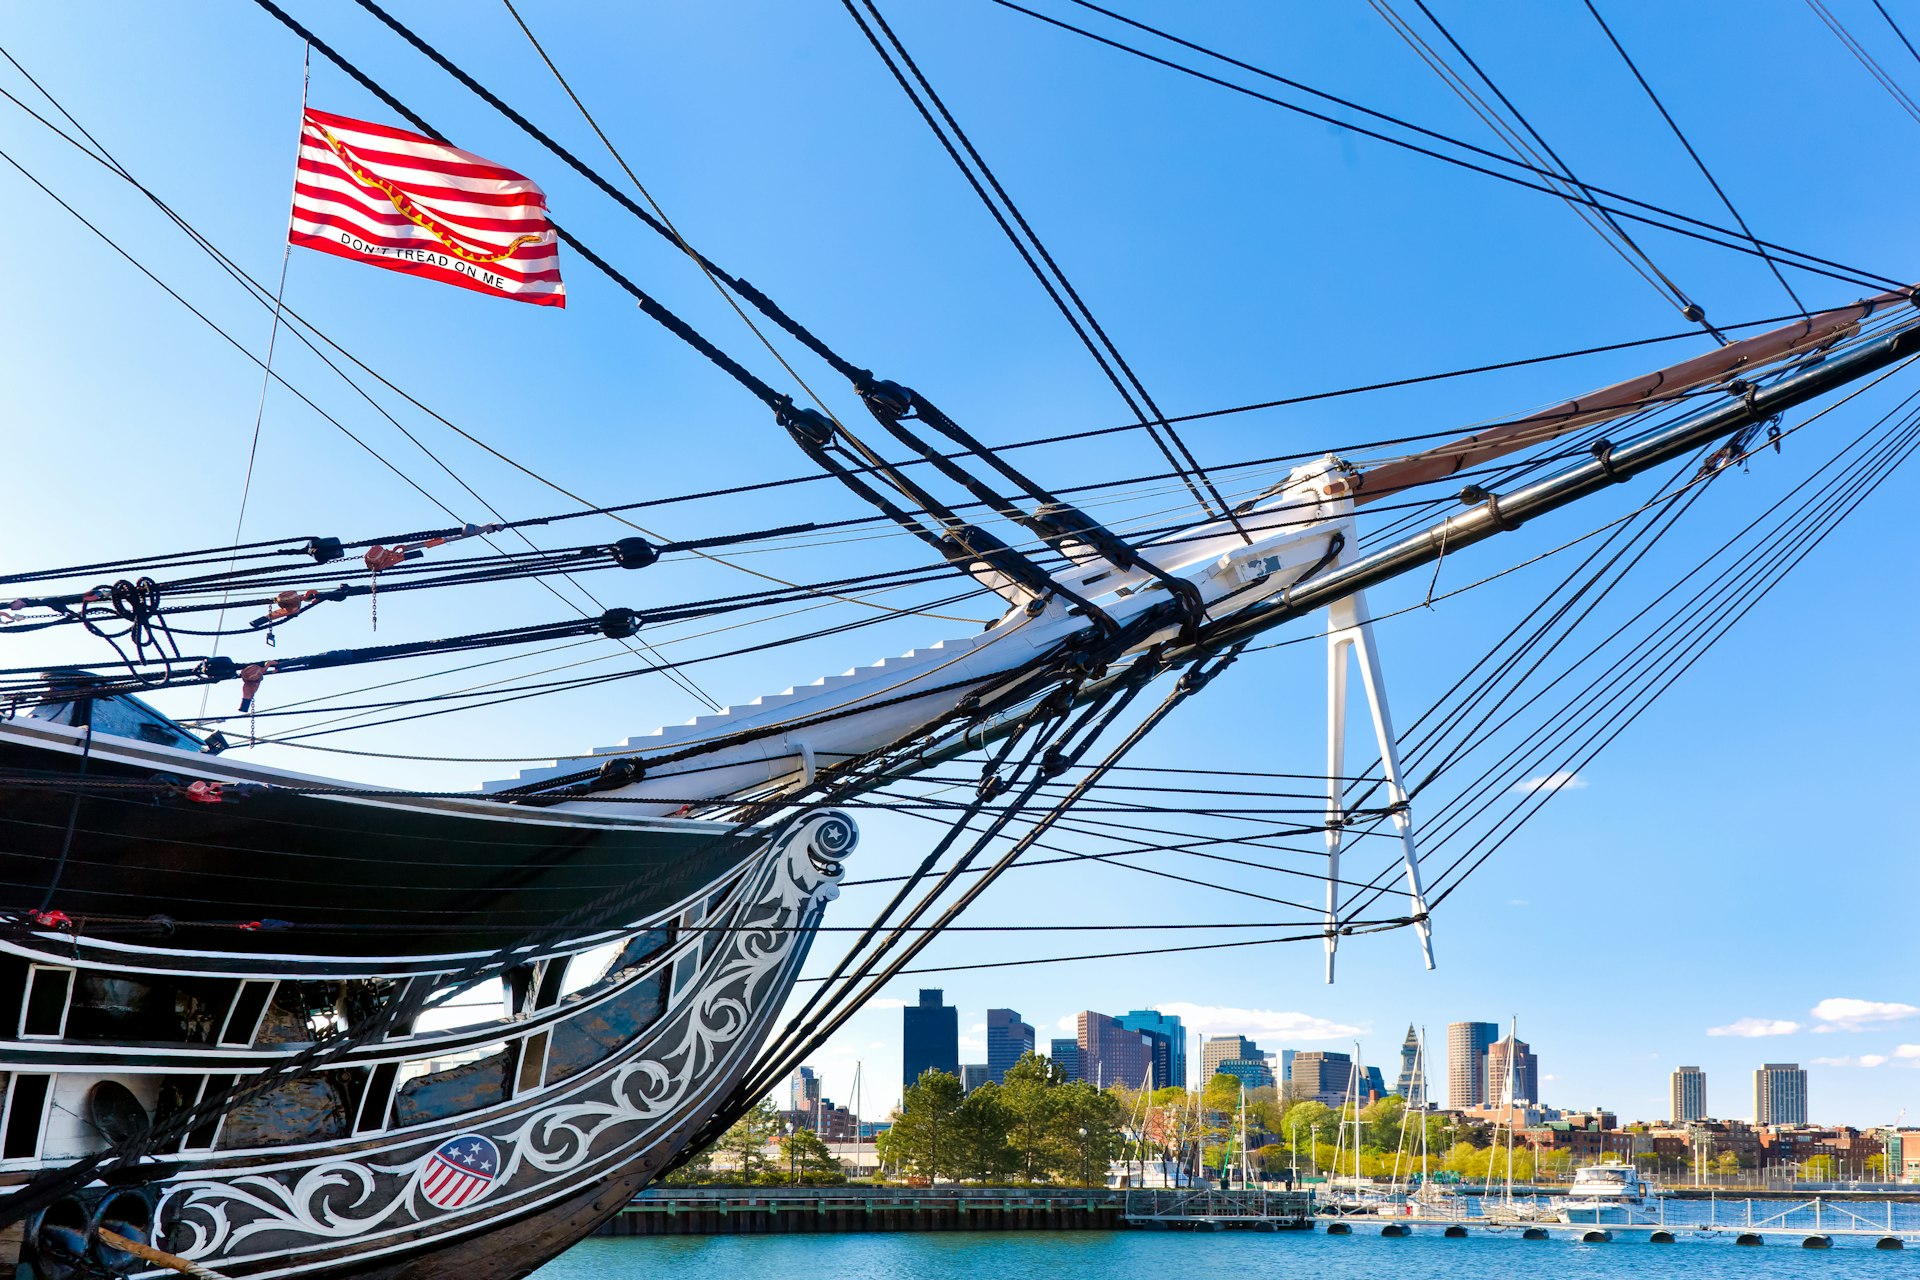 The bow of the USS Constitution rising against the cityscape